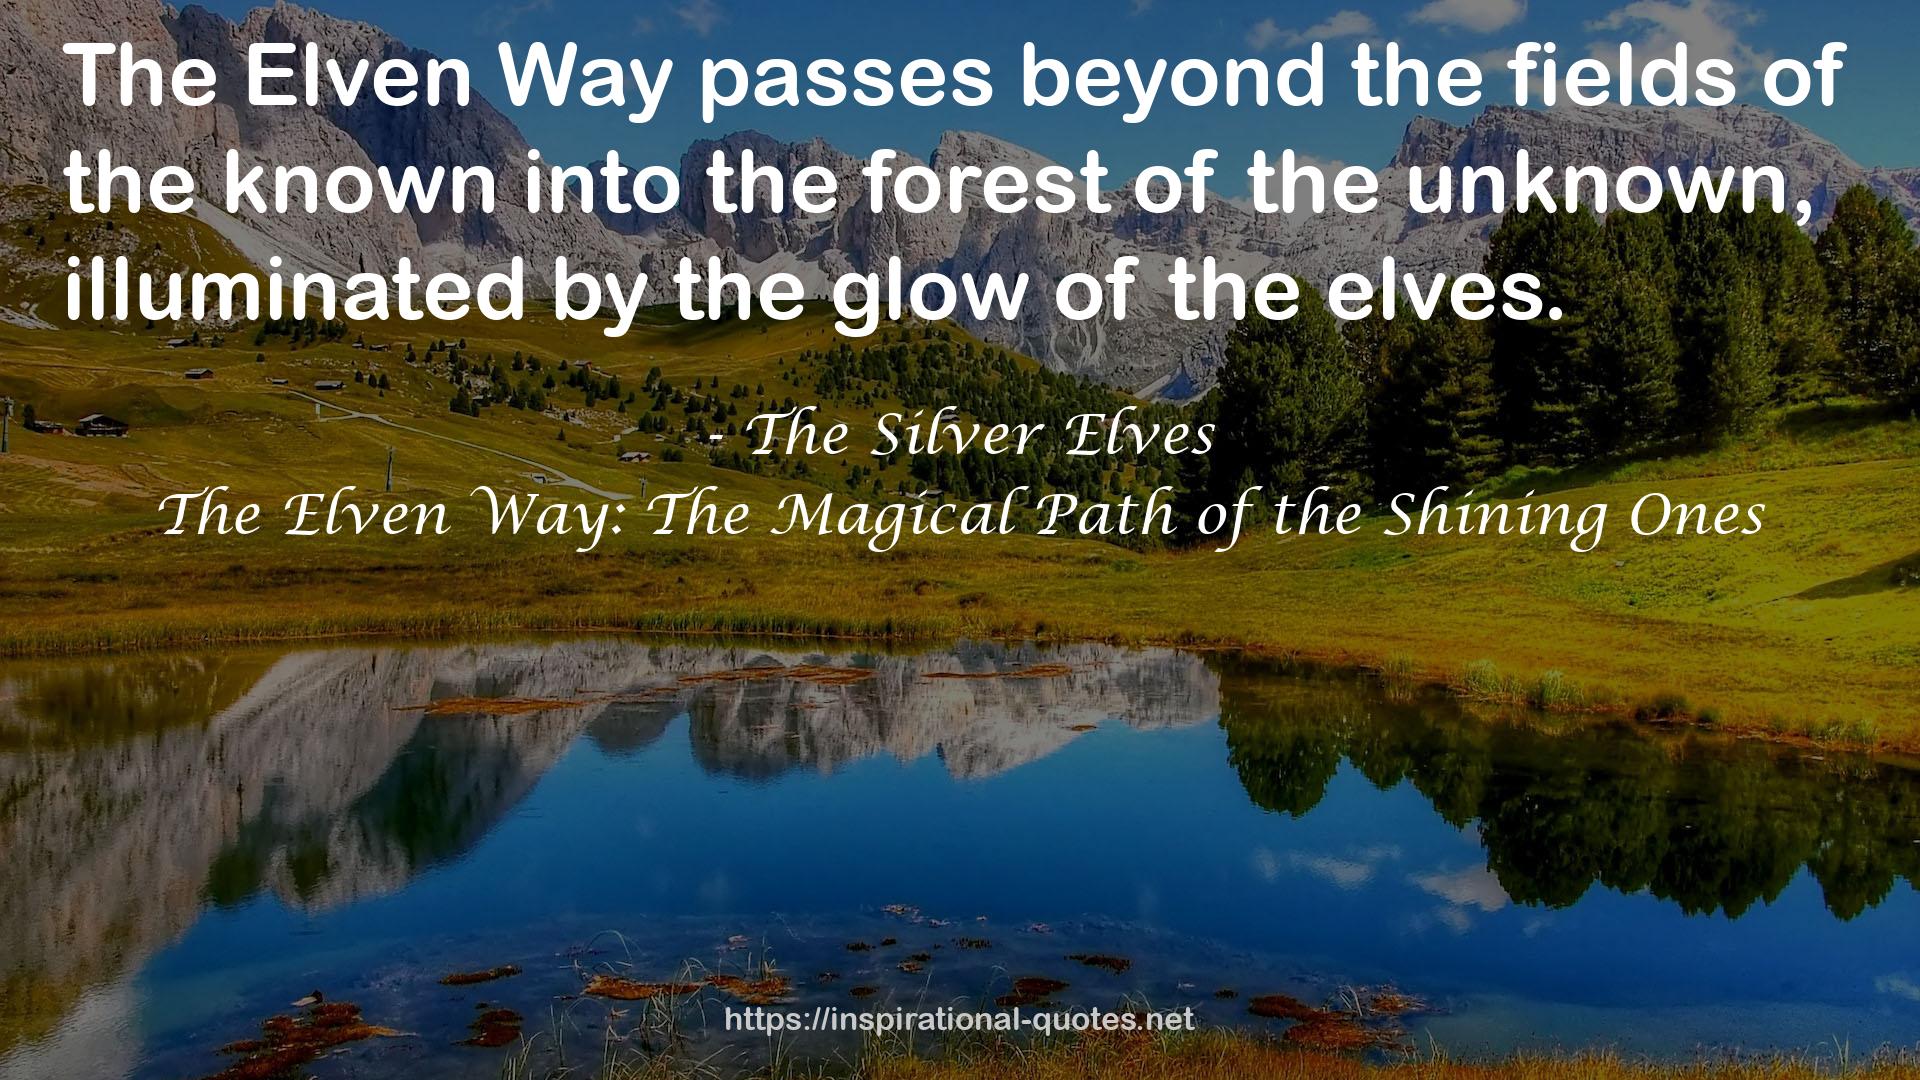 The Elven Way: The Magical Path of the Shining Ones QUOTES